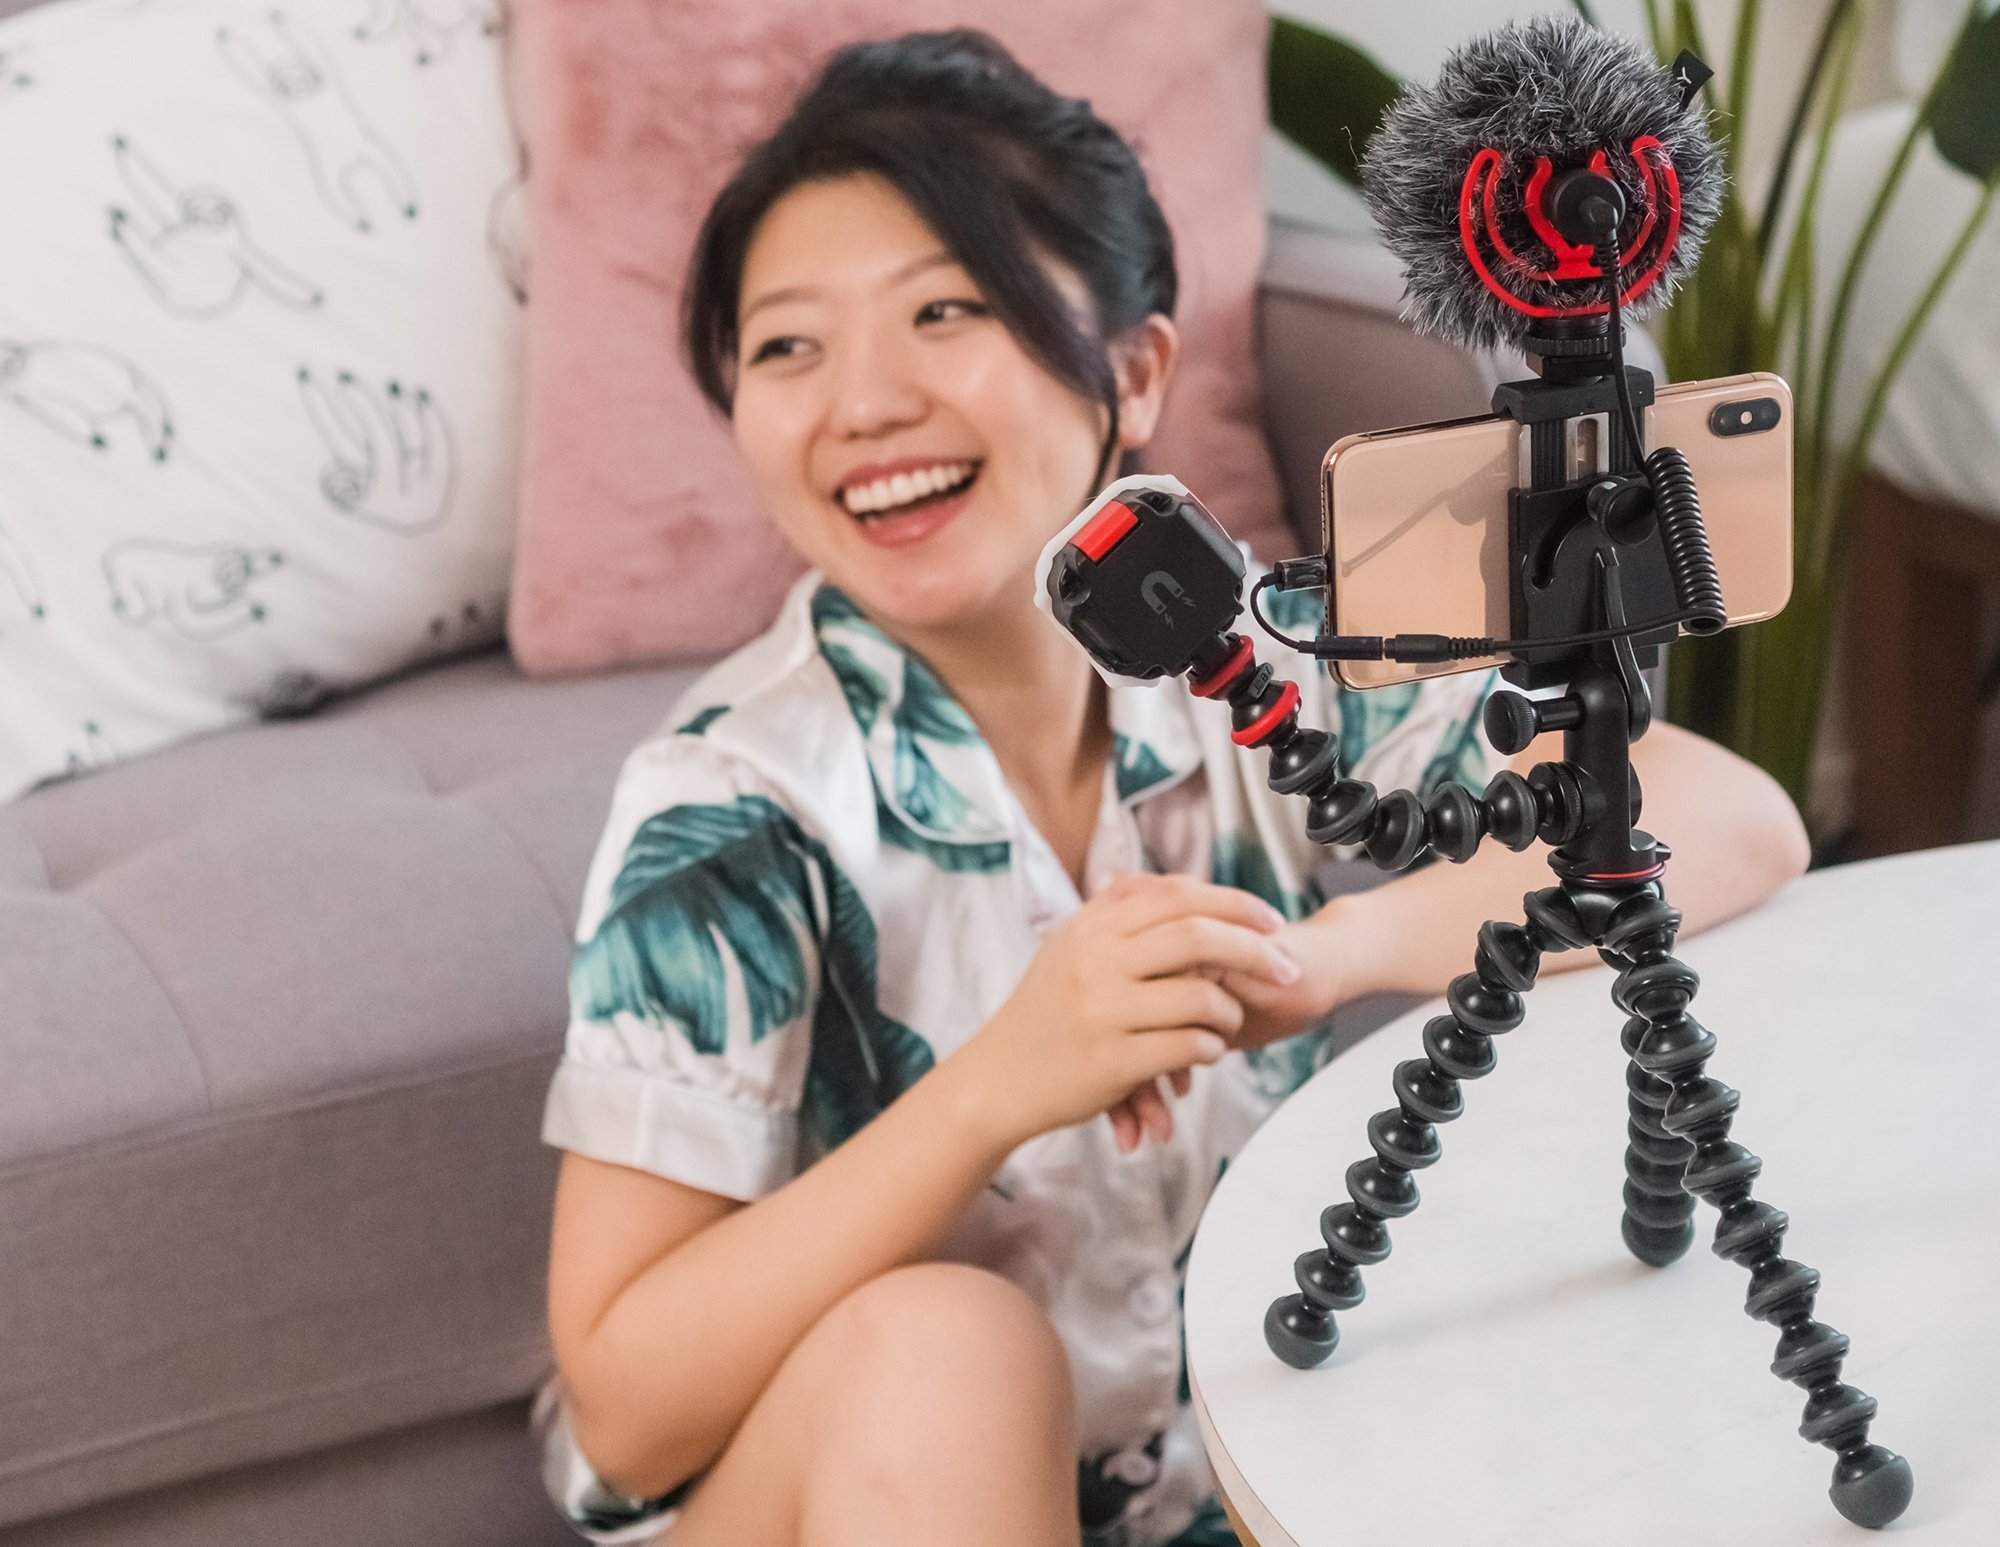 Woman sits smiling next to recording equipment